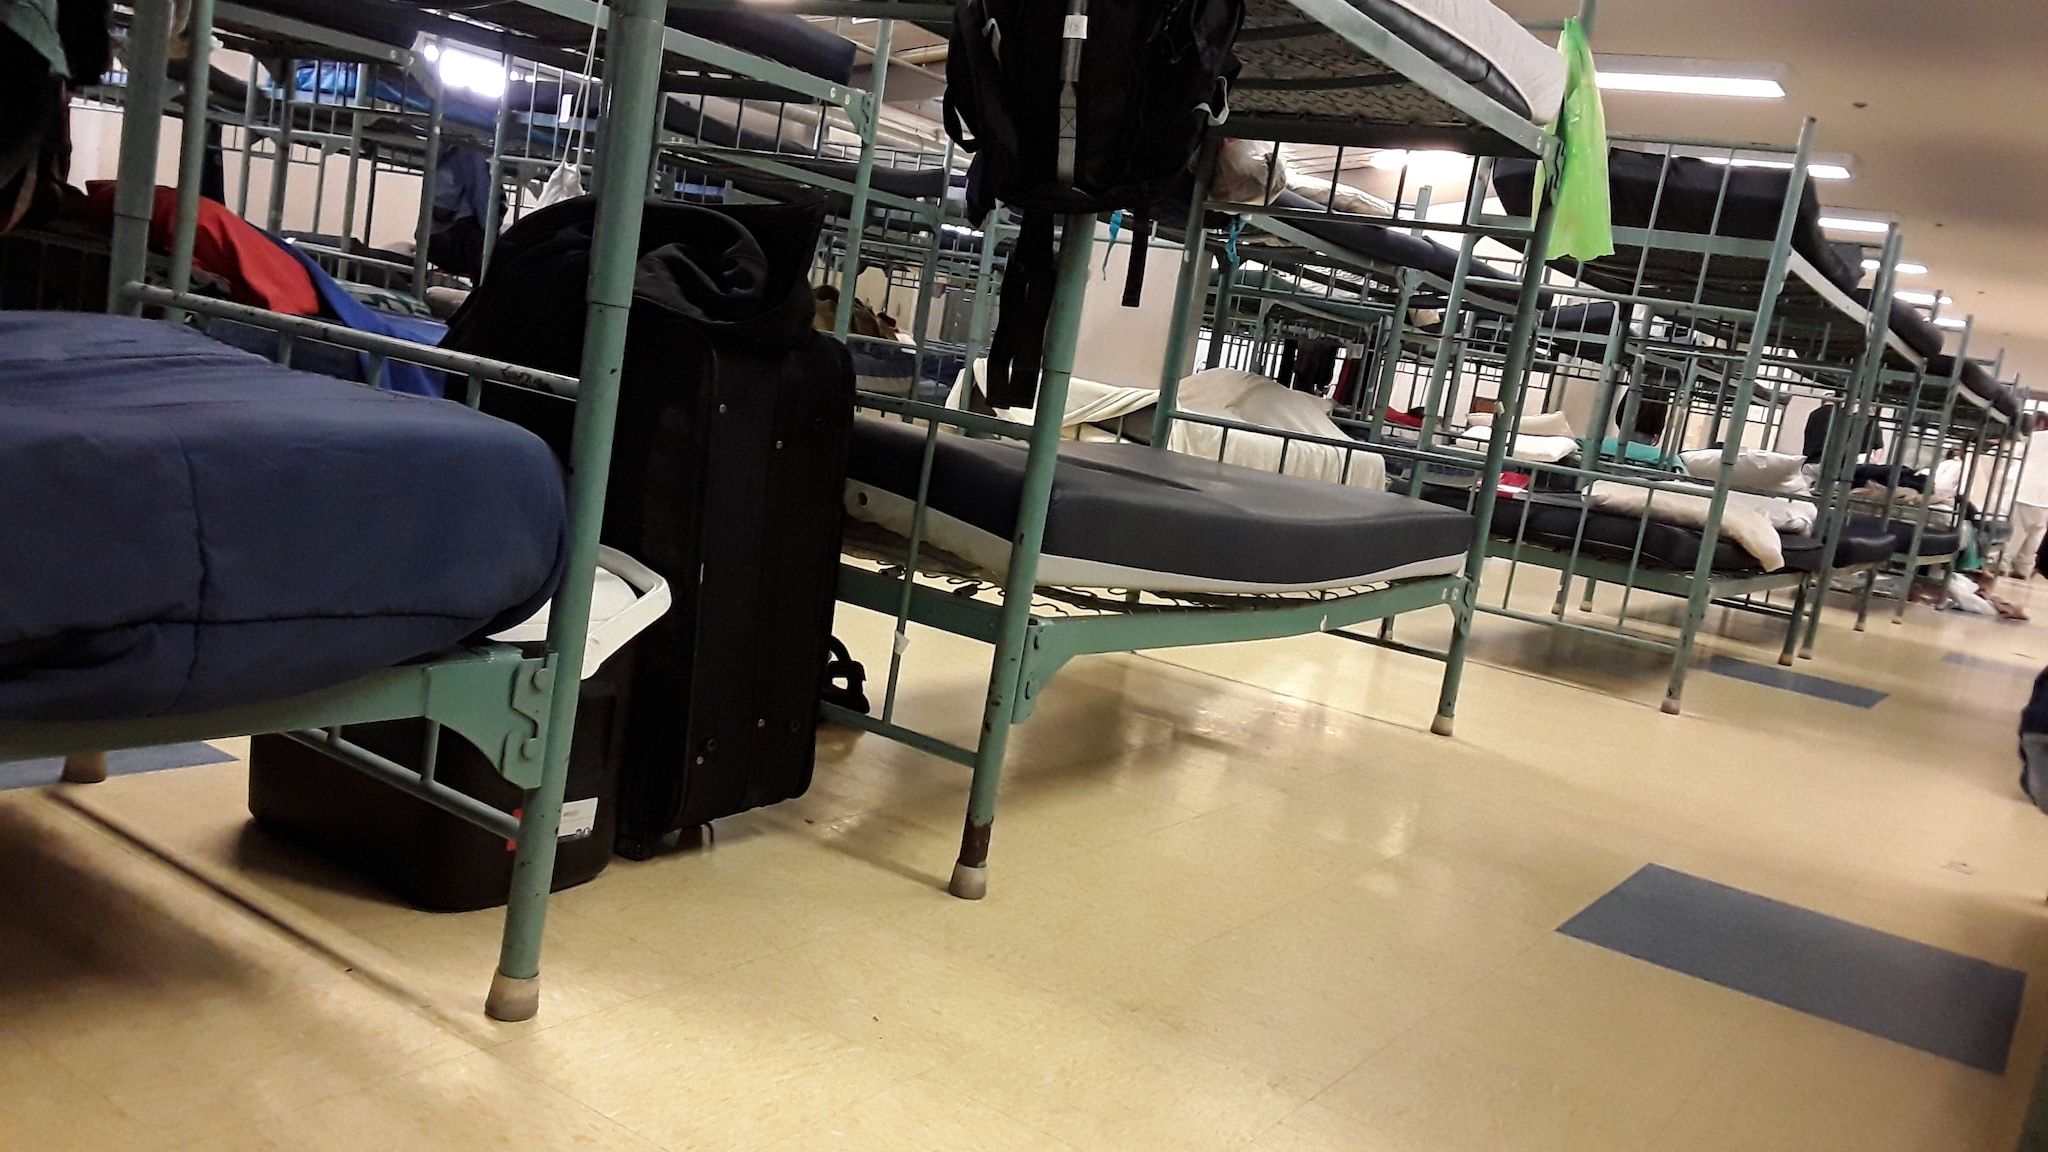 Sleeping cots in a homeless shelter.